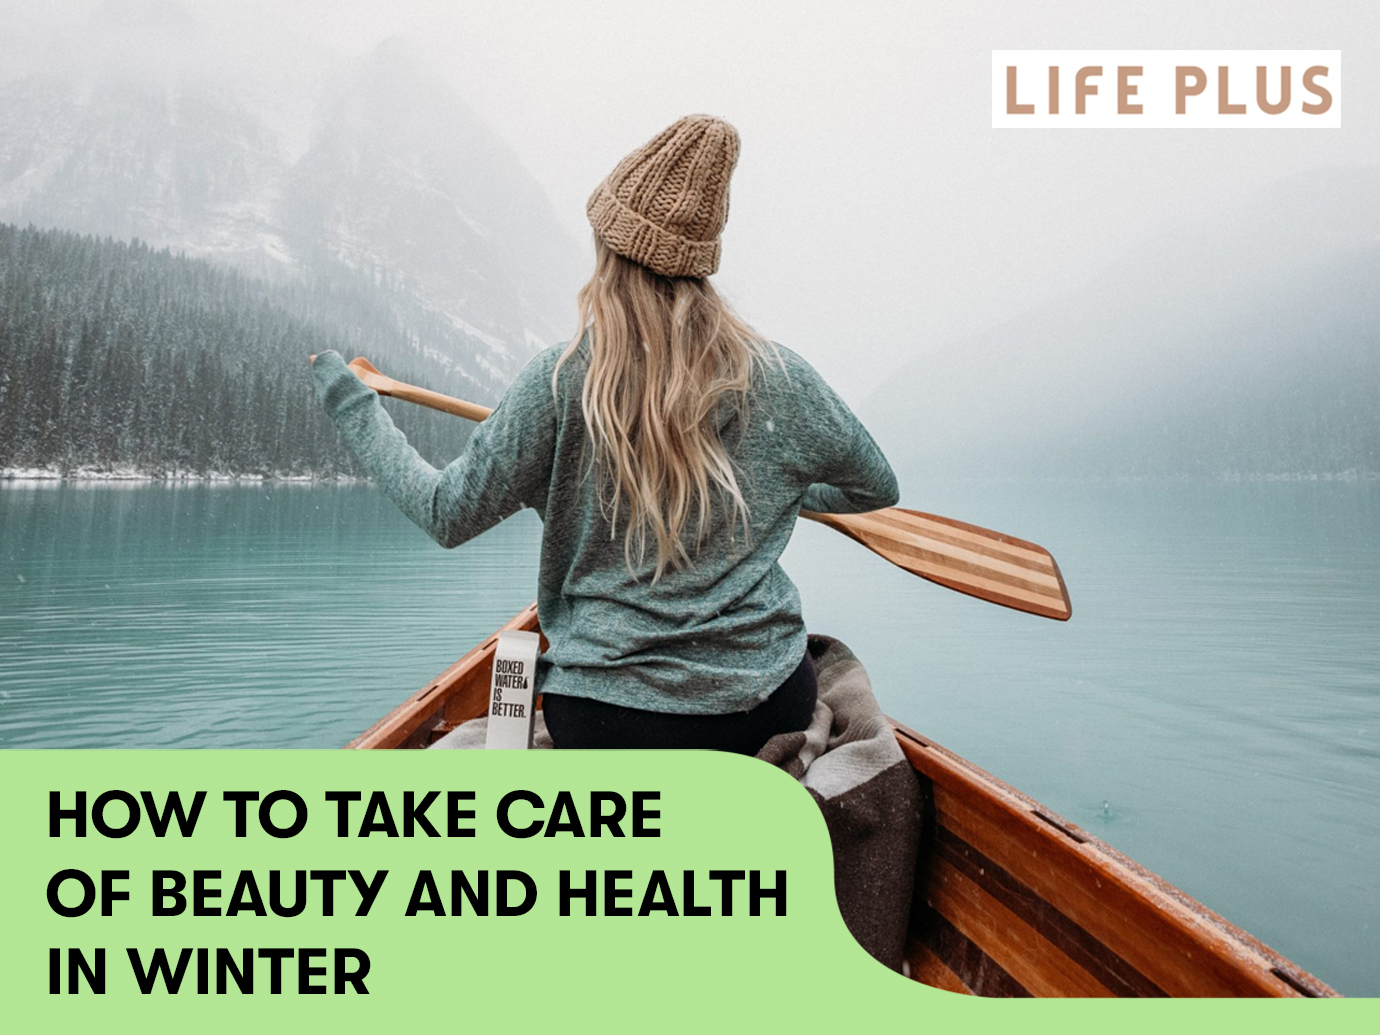 HOW TO TAKE CARE OF BEAUTY AND HEALTH IN WINTER